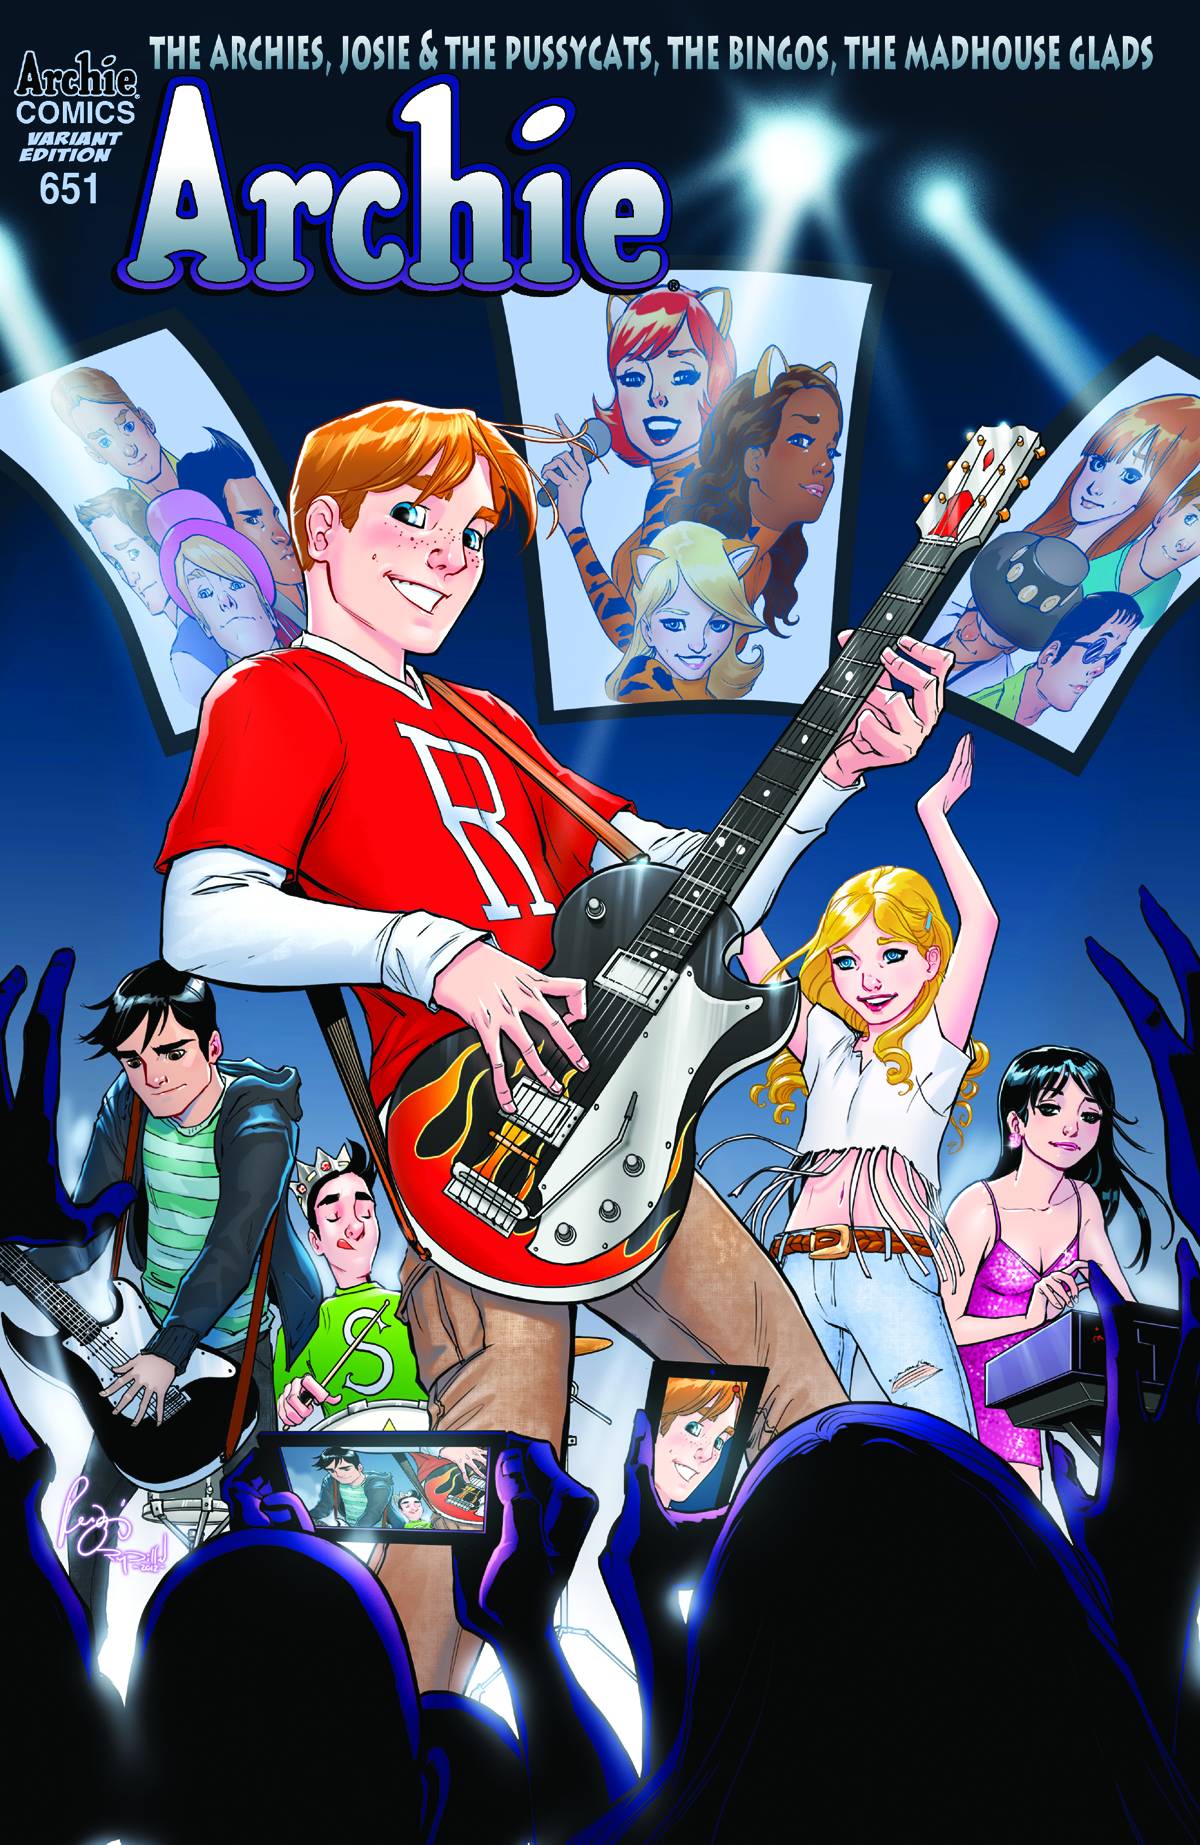 Archie #651 Battle of the Bands Variant Cover